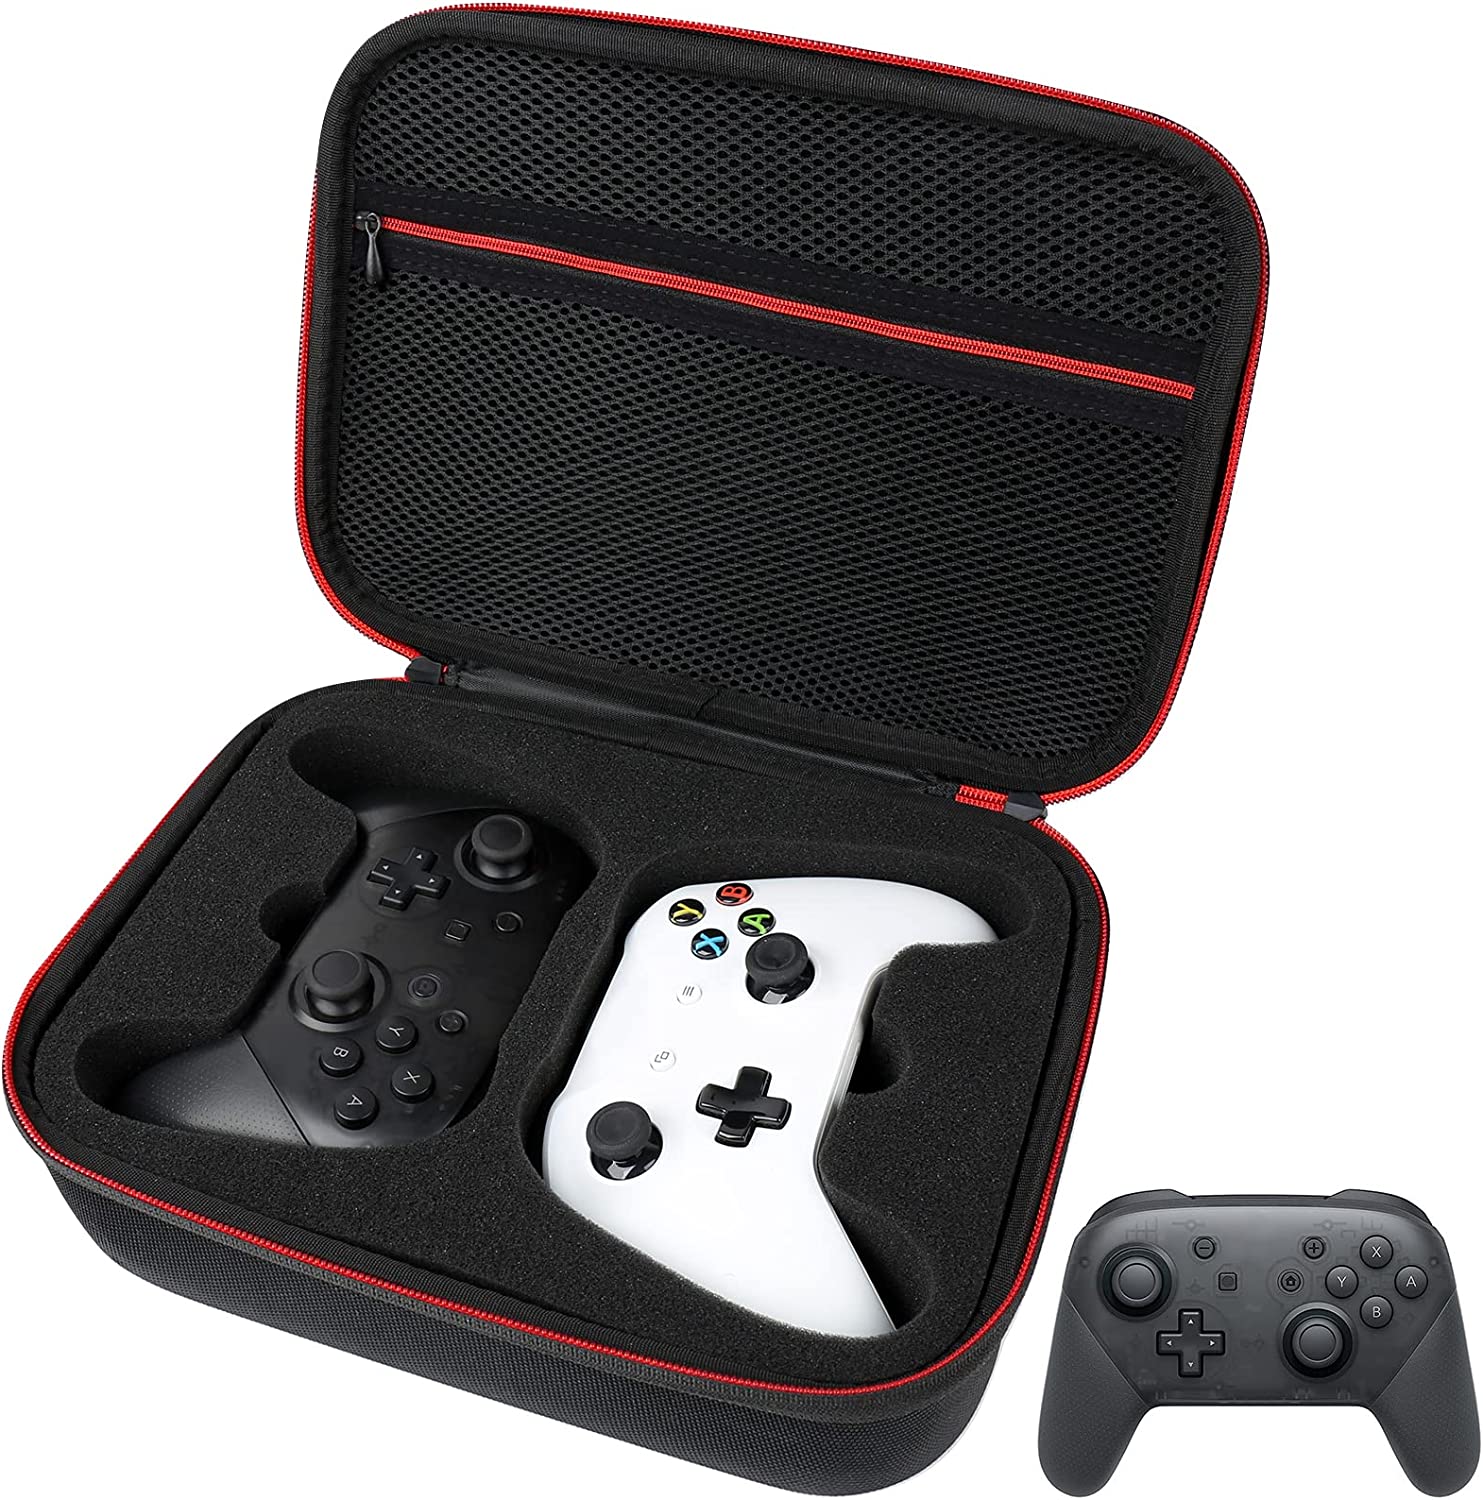 Younik Controller Carrying Travel Case Compatible with PS5, PS4, XBox one, Swtich Pro